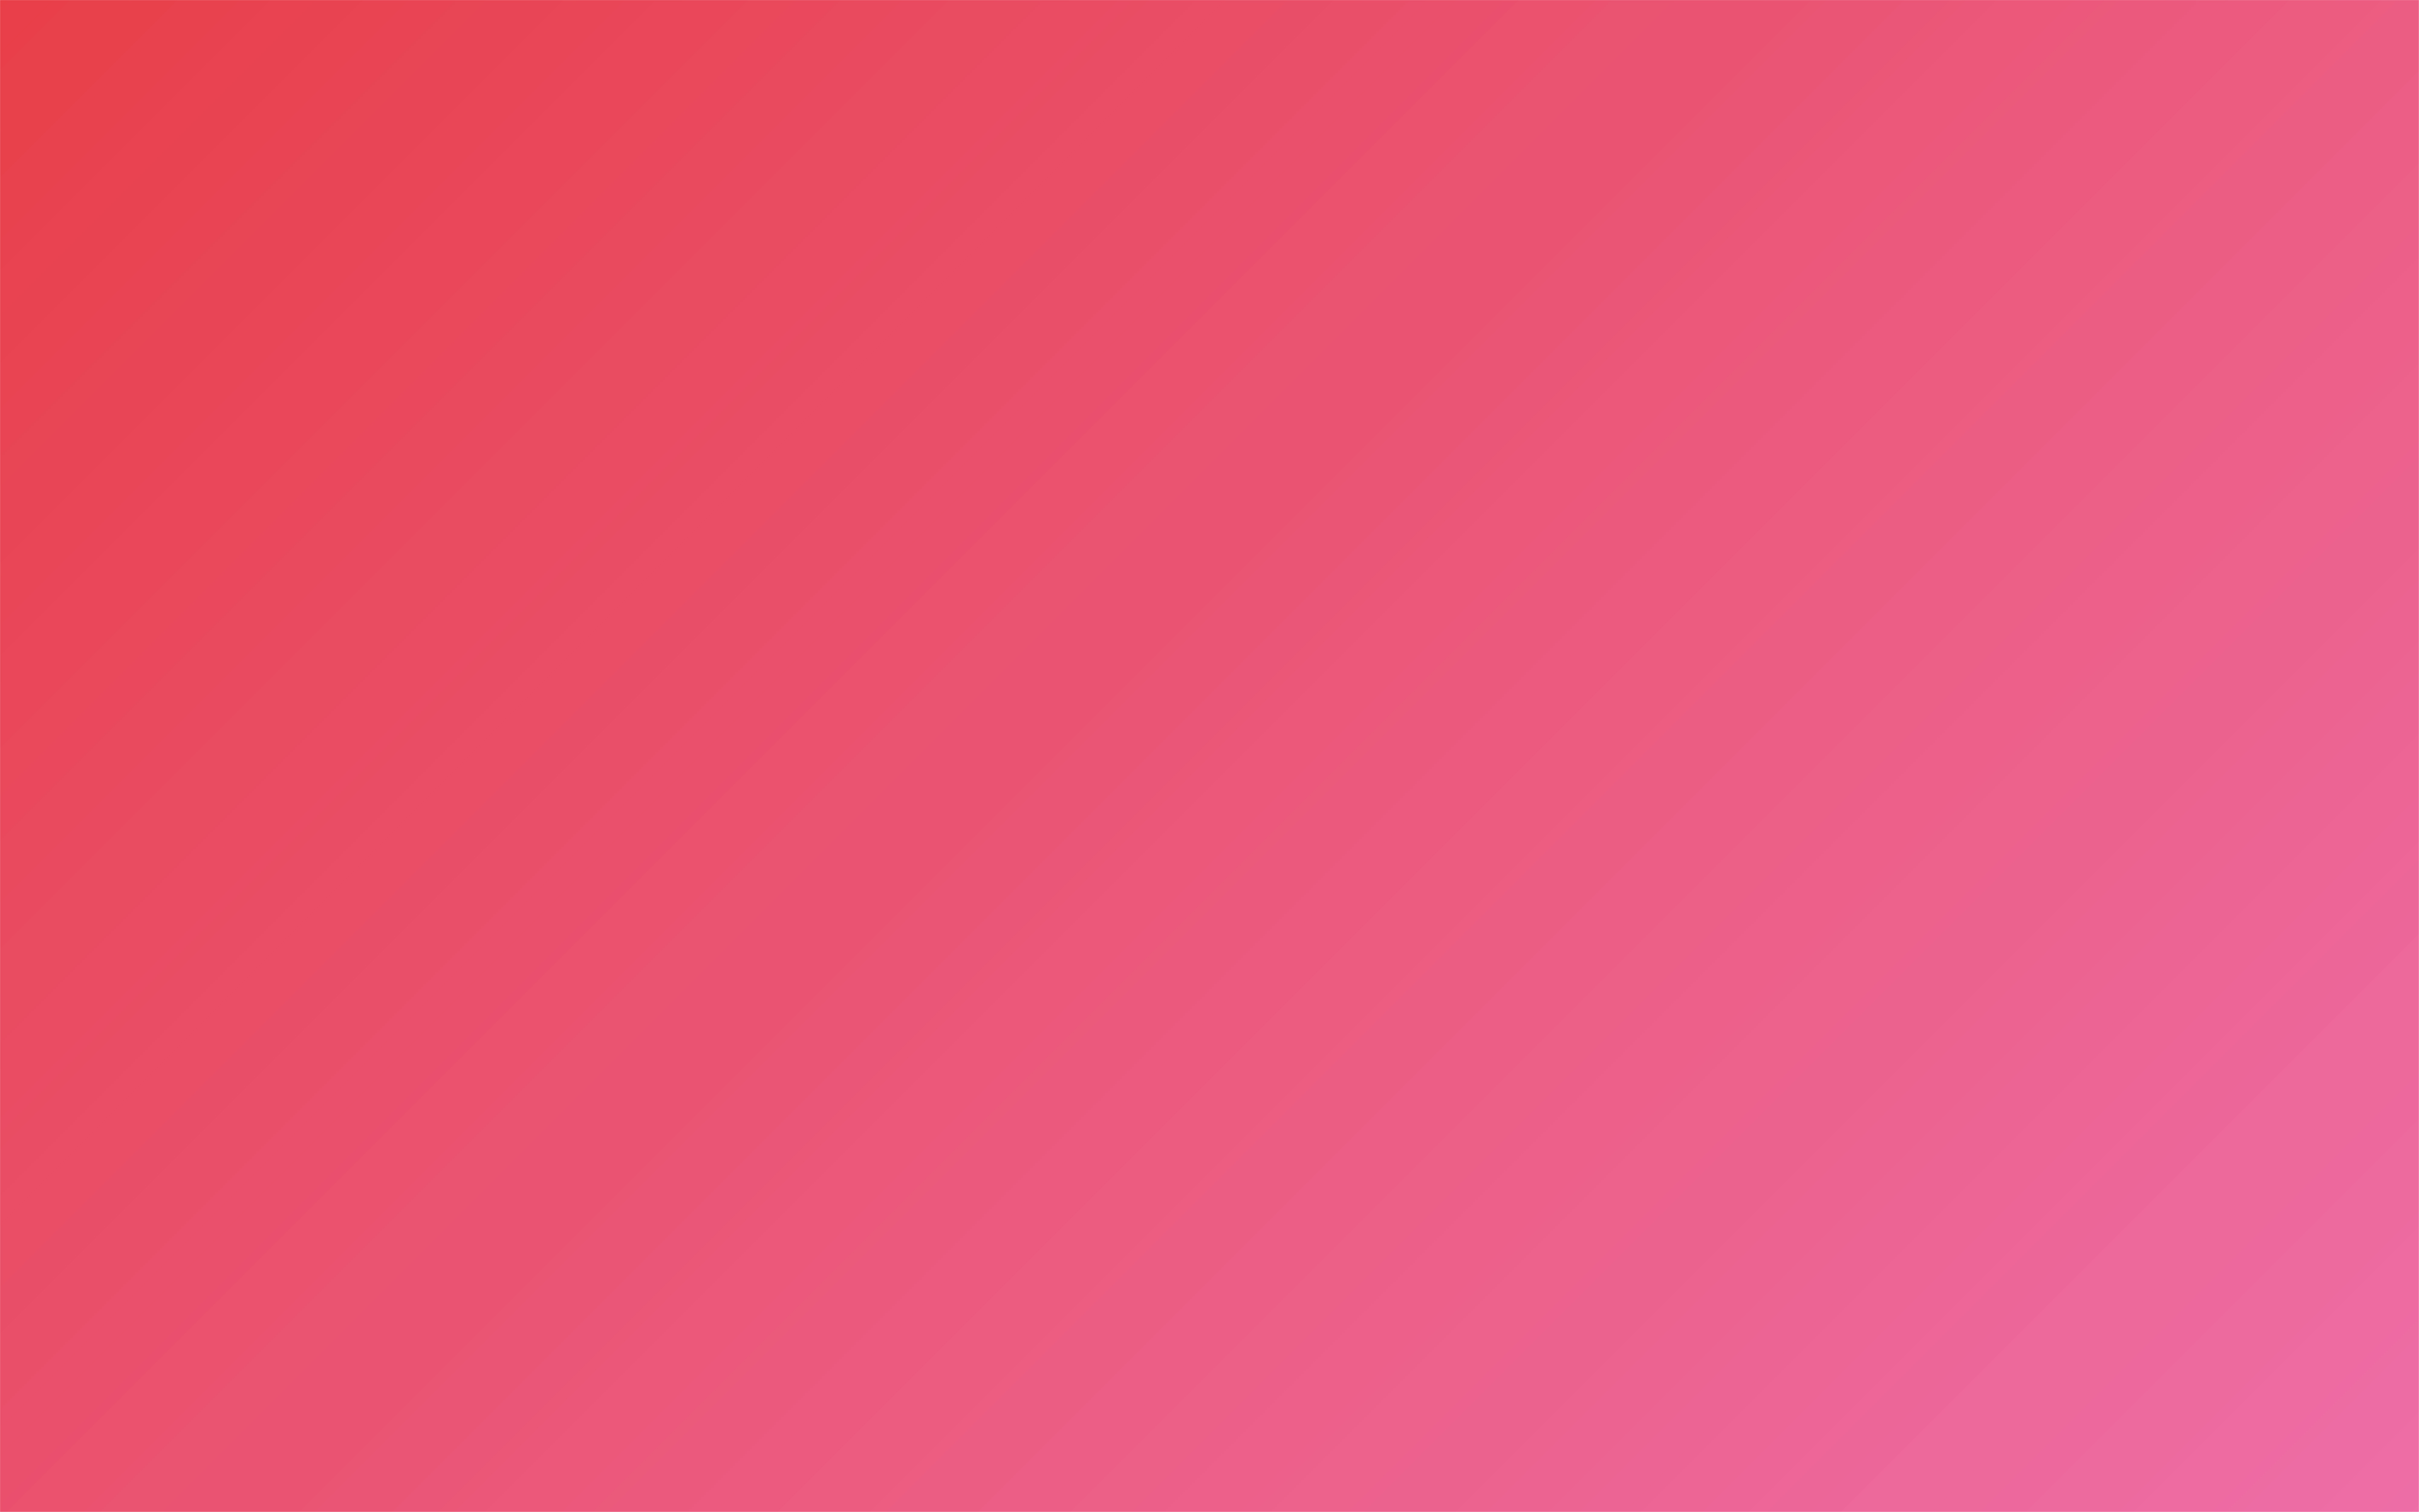 Pink Red Gradient Background - Free psd and graphic designs